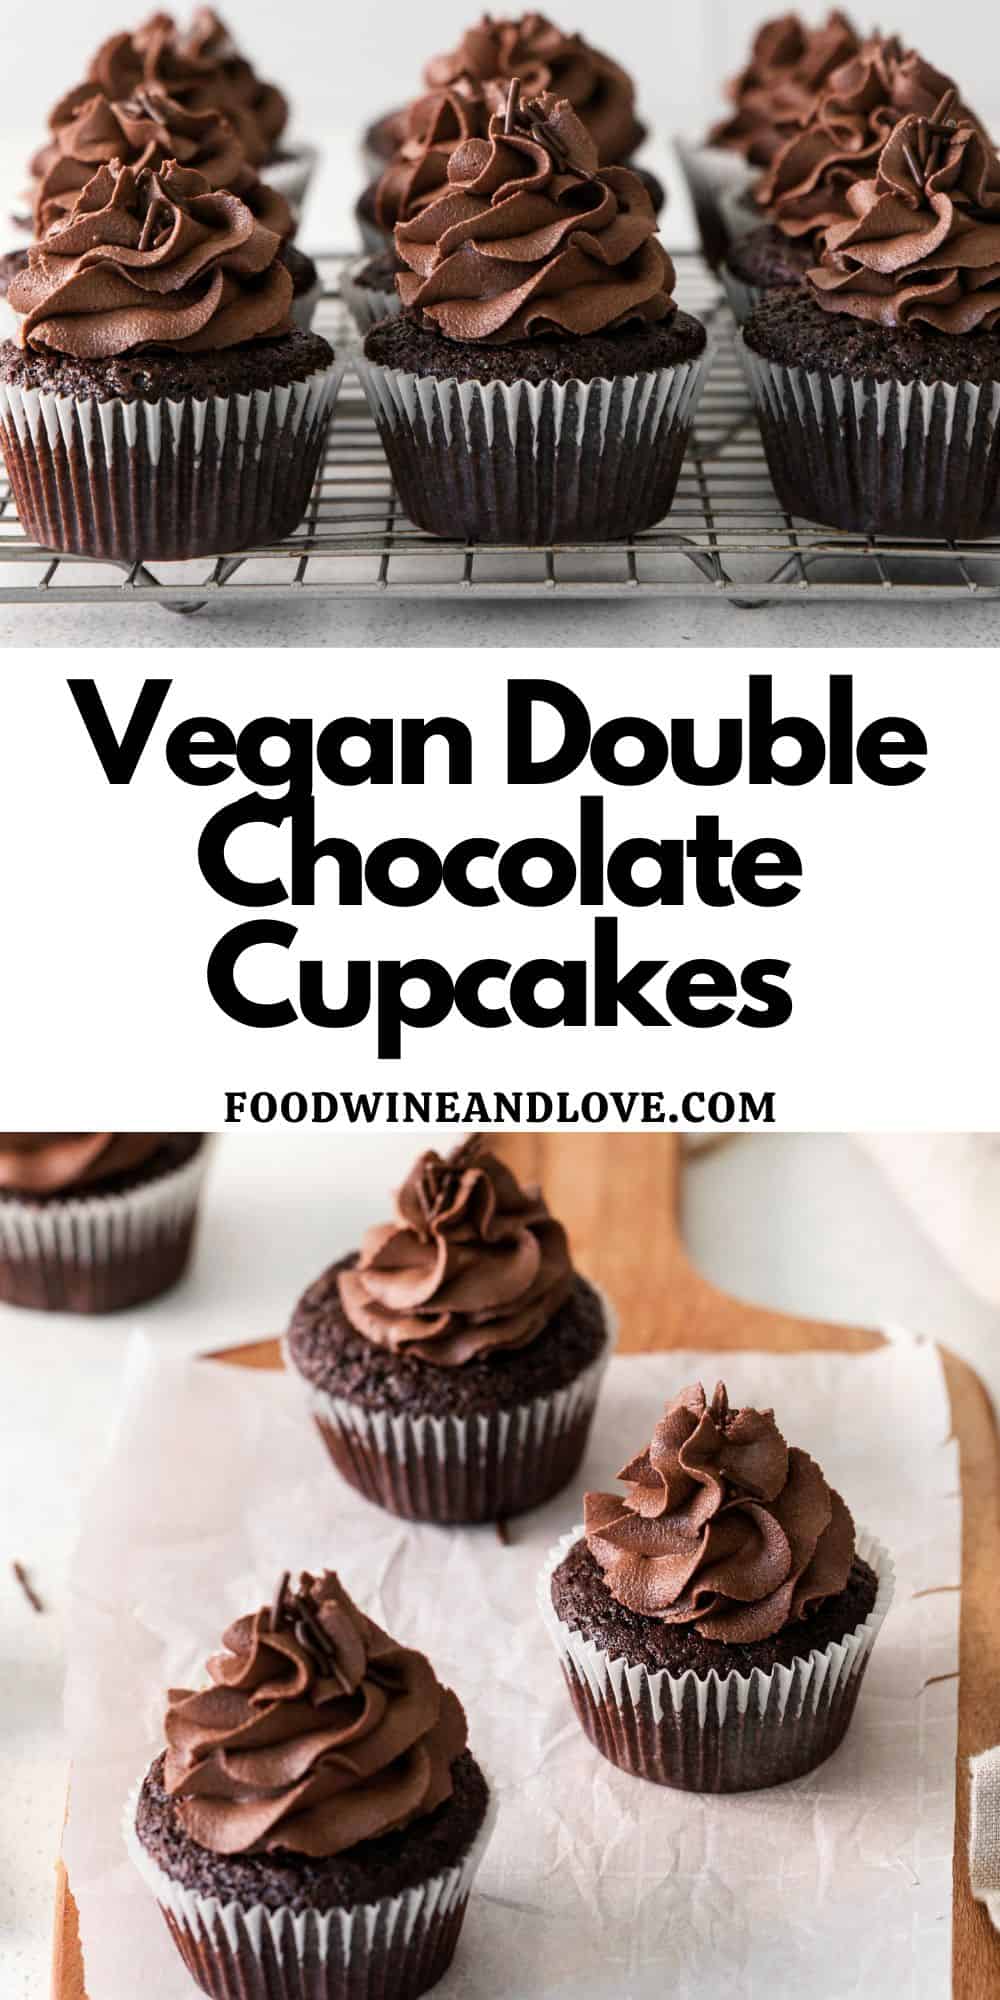 Vegan Double Chocolate Cupcakes, a surprisingly simple as well as delicious dessert recipe for moist and chocolatey cupcakes.